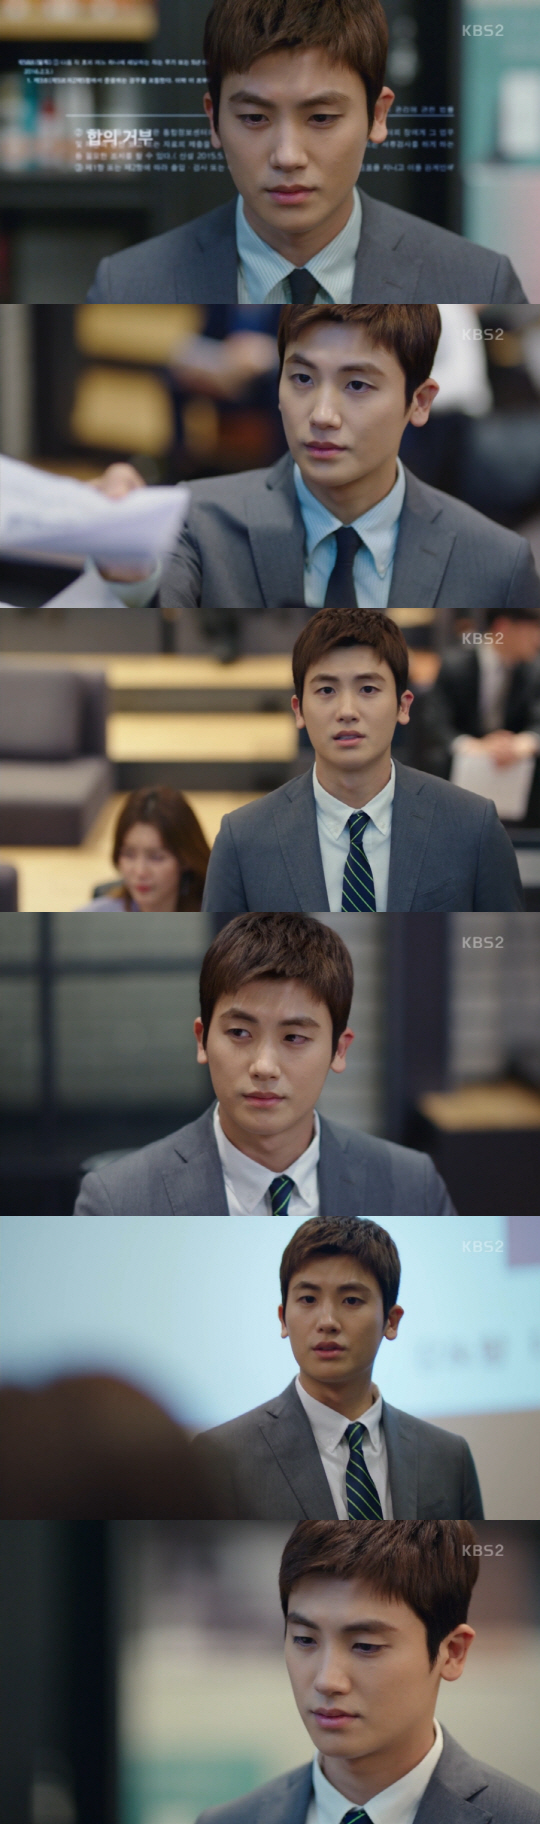 Suits Park Hyung-sik rocks with a tension in DramaCharacter, who has to pour out his lines without hesitation, is never simple for an actor; if many of those words are not everyday words, such as legal terms, the burden of an actor is greater.Nevertheless, it is the role of the actor to save the character and the drama with concentrated acting.In this sense, Park Hyung-sik in KBS 2TV tree drama Suits (playplayed by Kim Jung-min/directed by Kim Jin-woo/produced monster union, enter media picture) is inevitably attracting attention.Ko Yeon-woo, played by Park Hyung-sik in Suits, is the owner of a genius matching king that never forgets once you see and understand.Drama, who hides his identity as a fake new lawyer and enters the South Korea Supreme Law Firm, meets with a legendary lawyer there and plays chewy court play and romance, is Suits.To this end, Park Hyung-sik is making the color of the drama by pouring out professional legal terms every time.But Park Hyung-sik didnt stop here.Feeling and situation of the person who changes every moment are filled with intense hot rolling and exquisite control, and shake the tension of the drama.In the scene of the Moot court in the 6th episode of Suits broadcast on May 10, the concentration and ability of the actor Park Hyung-sik were intensely shining.In the play, Moot Court is a great opportunity for new lawyers. Ko Yeon-woo has faced a cowardly capitalist enemy in this important Moot Court.Ko Yeon-woo showed genius matching king and base, and overcame the crisis and took control of the moot court.But like the real court, Moot court could not simply be cut with black and white.Kim Ji-na (Go Sung-hee), who shared a secret with Ko Yeon-woo, was involved and several Feelings were complicated and subtle.A situation where Kim Ji-na must be pushed harder to win the Moot court.But because she was the only one who knew her secret, she could not push Kim Ji-na, who was shaking, misunderstanding that the secret would be revealed.The will for victory, pushing, shaking Feeling, and giving up victory for the other party.In a relatively short time in which the Moot court unfolds, Park Hyung-sik delicately captures these Feeling changes.All of Park Hyung-siks things moved organically with the Feeling line of Ko Yeon-woo.Depending on the situation, Feeling and acting also have different amplitudes, and the completed control called the tension of the entire Moot court scene.Thanks to this, viewers in front of the TV were able to immerse themselves in the change of Feeling of Ko Yeon-woo.Suits is a Drama with many advantages.Another important viewing point was added, in addition to the most superficially revealed two mens bromances, chewy court play, and the unpredictable chemistry of three-dimensional figures: a stunning Tension.And the character who showed the tension thrill is the actor Park Hyung-sik who painted it.Another Tension to be made by Park Hyung-sik in Suits is curious and expected.Meanwhile, KBS 2TVs drama Suits is a drama depicting the legendary lawyer of South Koreas top law firm and the bromance of a fake new lawyer with a genius matching king.Very Wednesday, it airs Thursday night at 10 p.m.